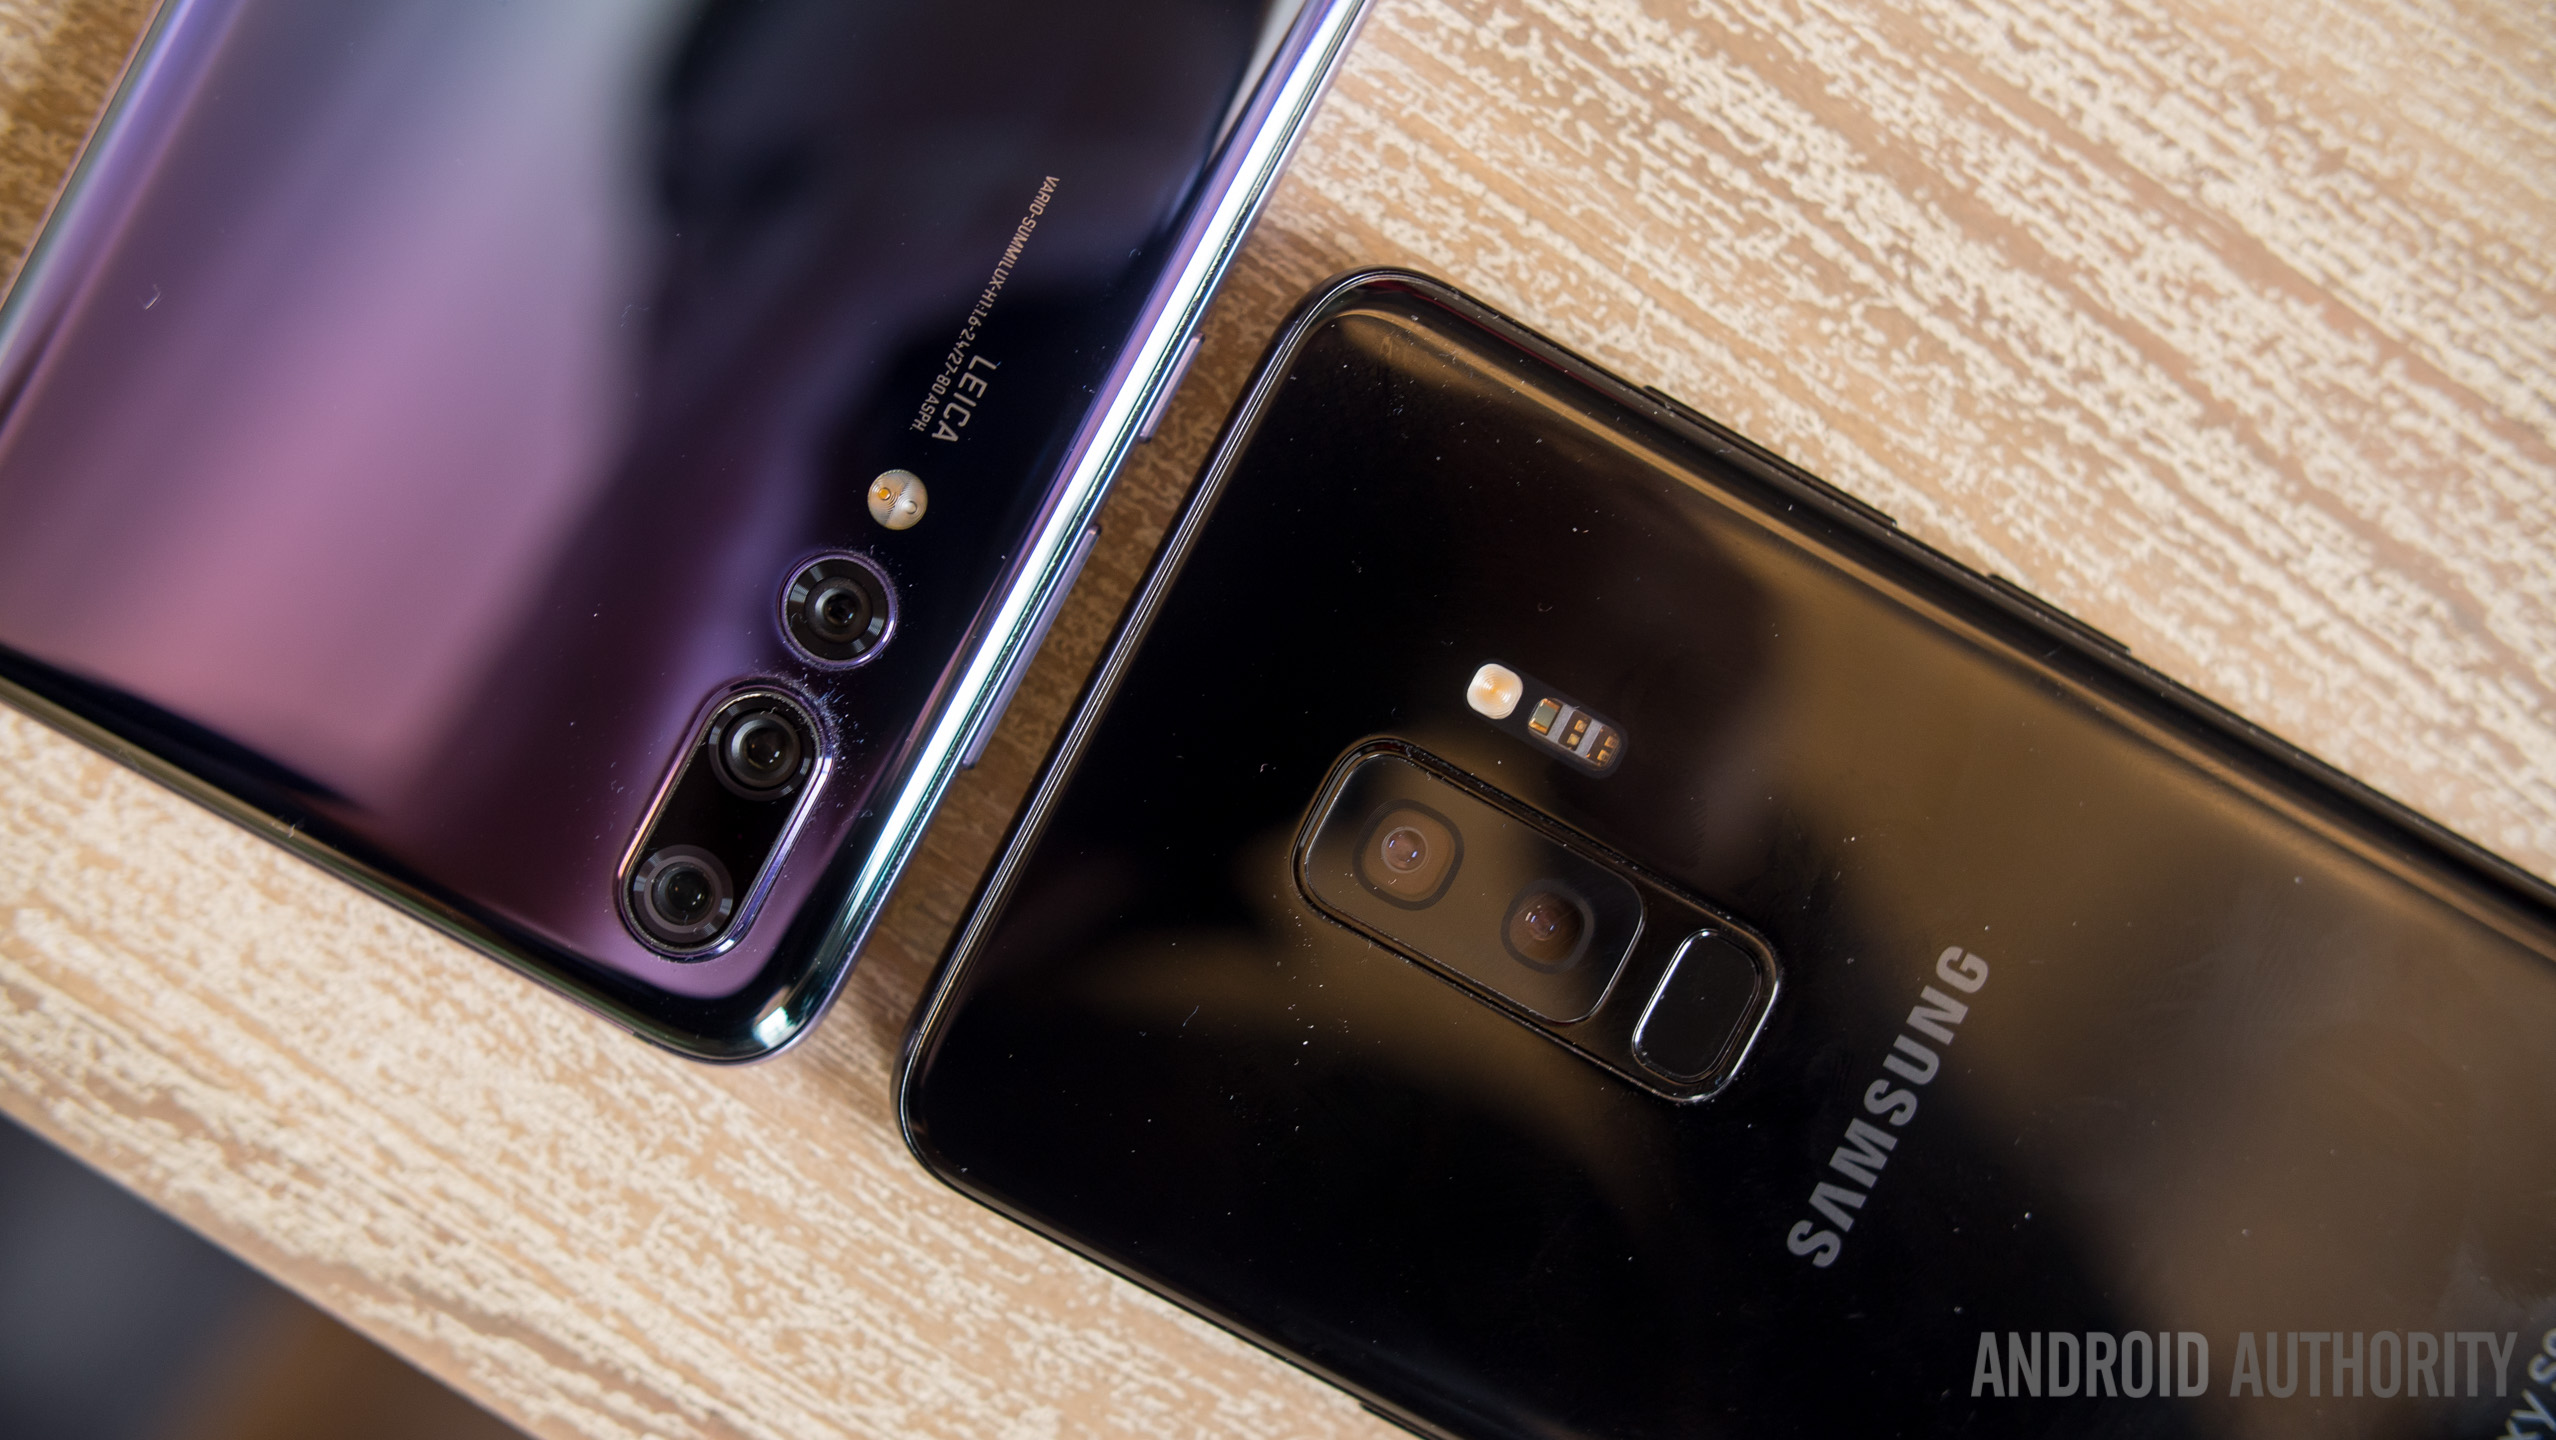 best Father's day tech gifts - HUAWEI P20 Pro and Samsung Galaxy S9 Plus